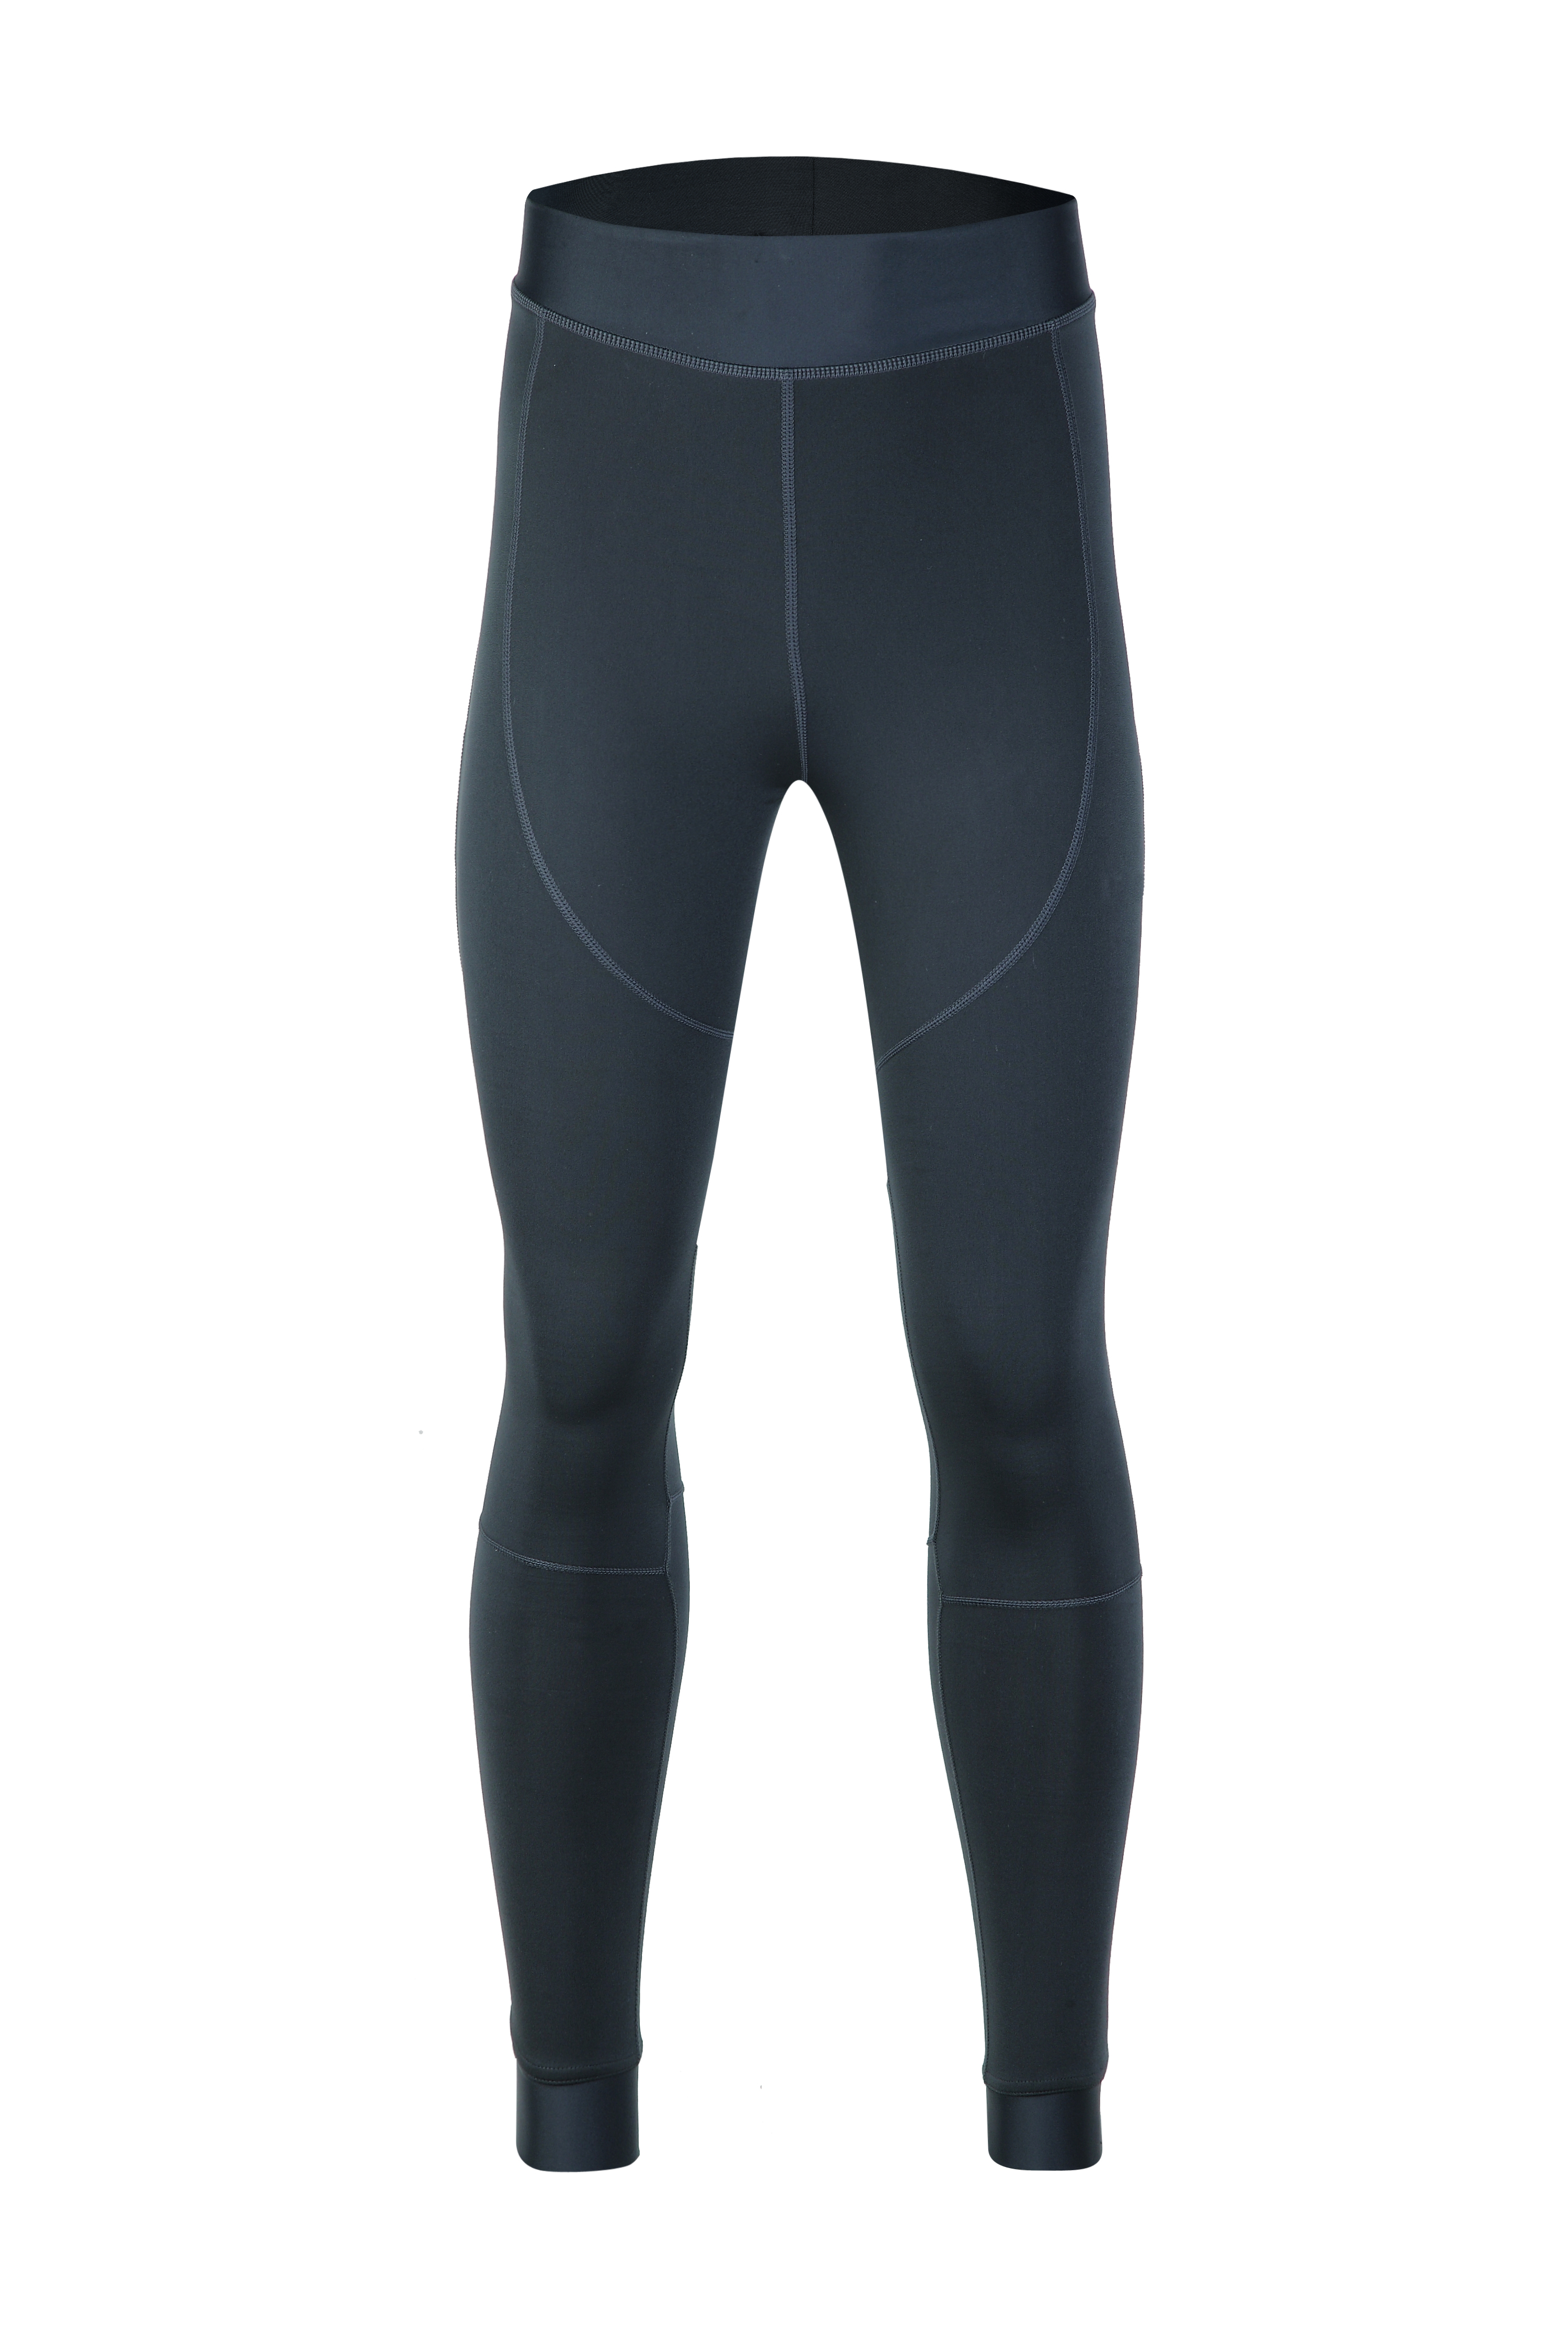 Men’s knitted cycling Tight.